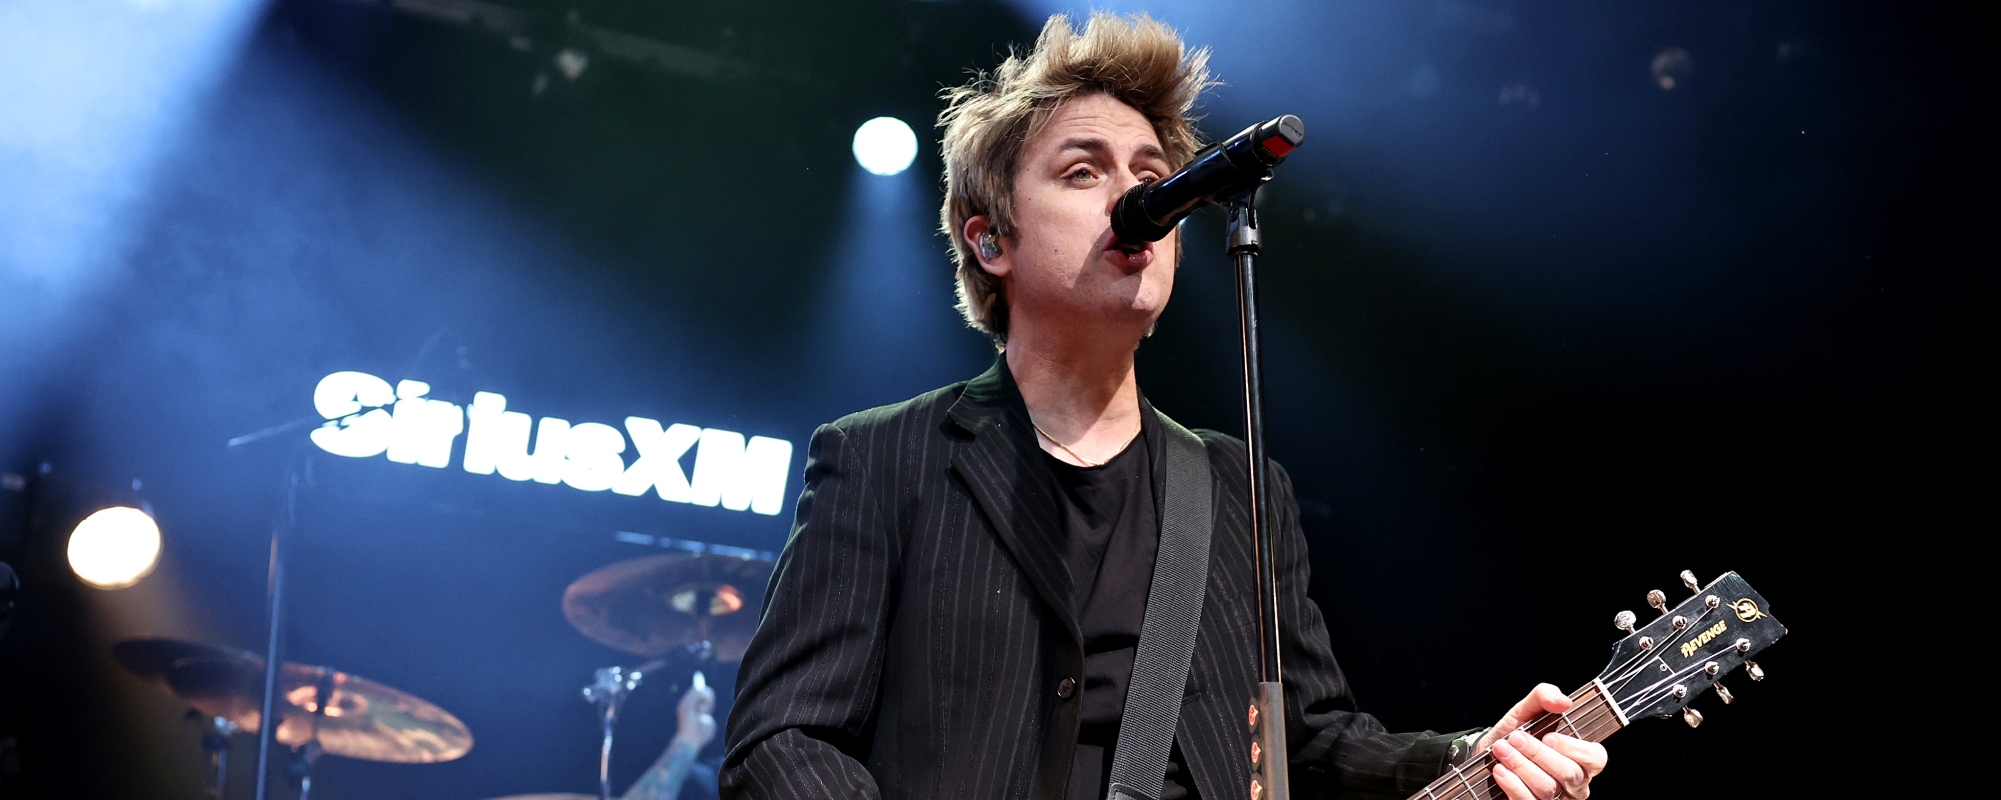 Billie Joe Armstrong Opens Up About Being a Bisexual Icon, Discusses Green Day’s New Anthem “Bobby Sox”